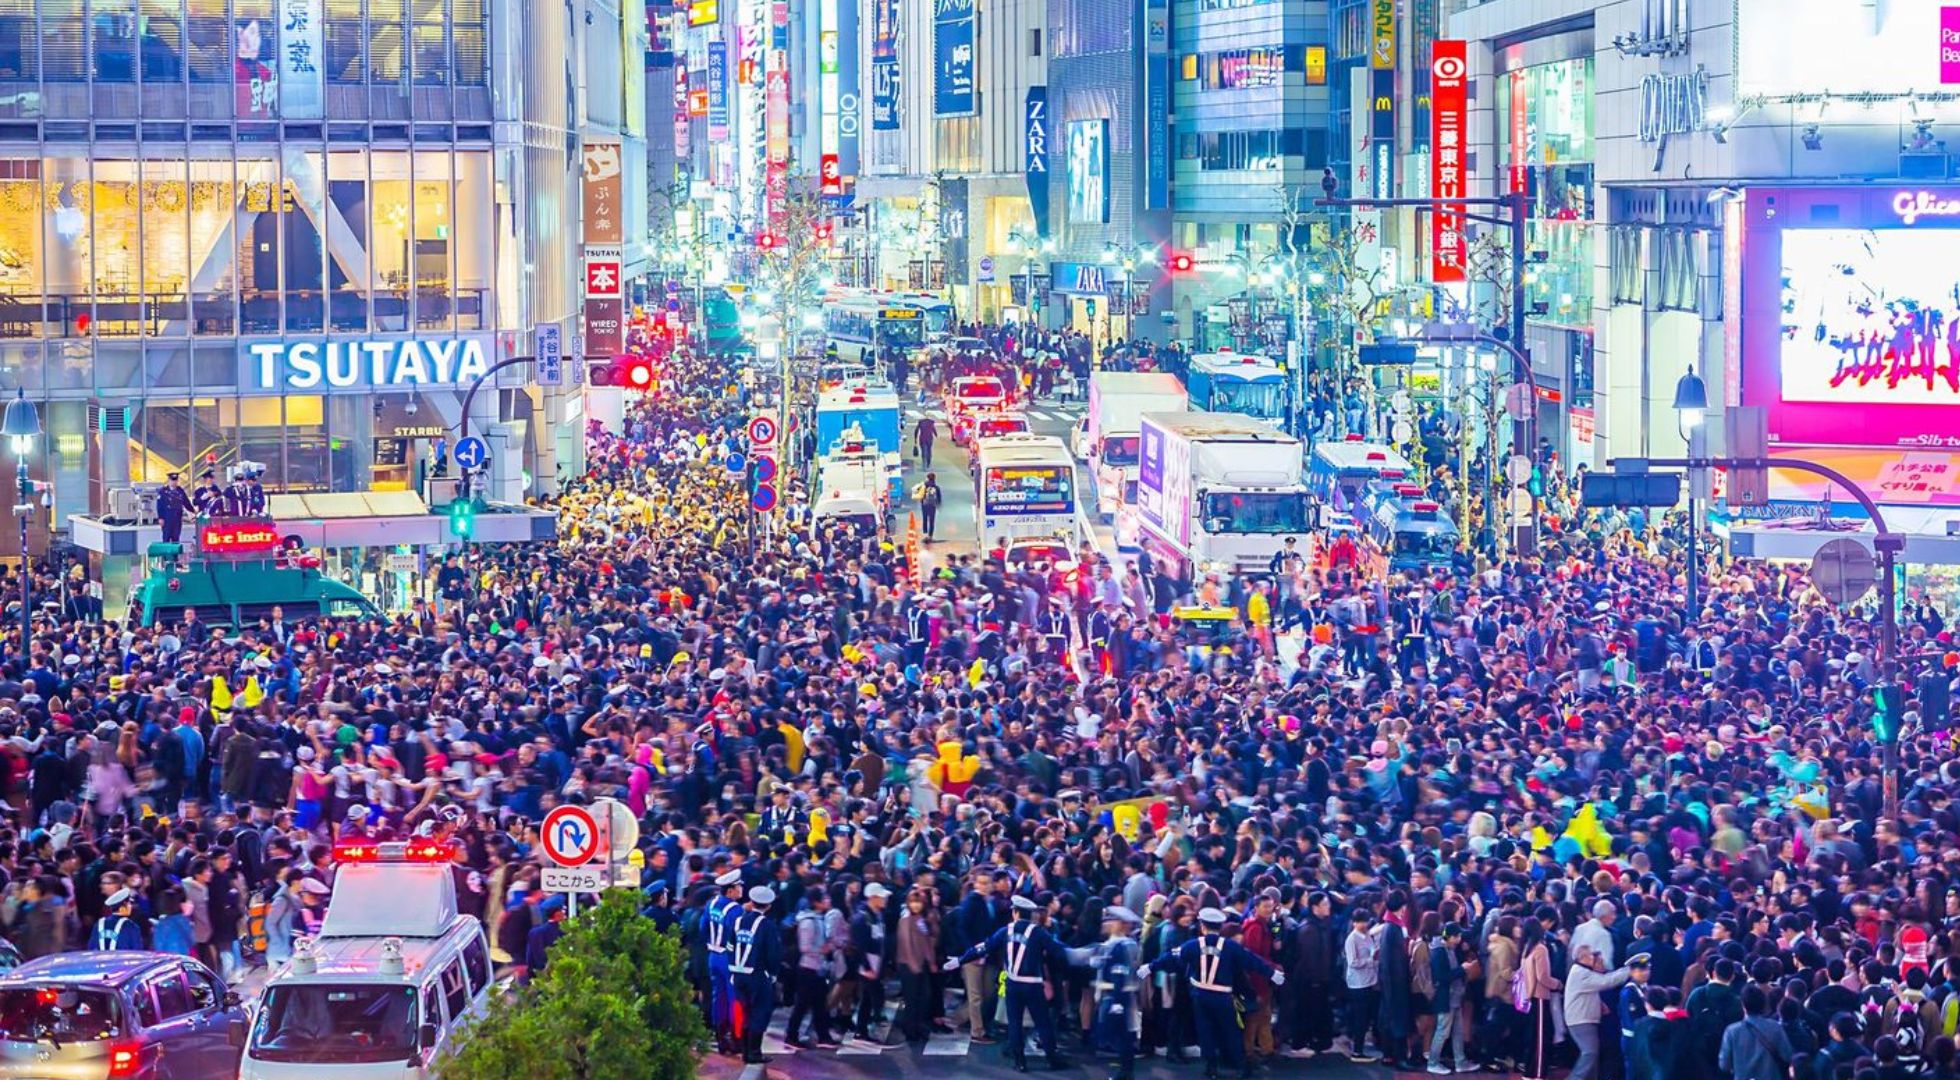 Tokyo at night is best seen from the world-famous Shibuya crossing